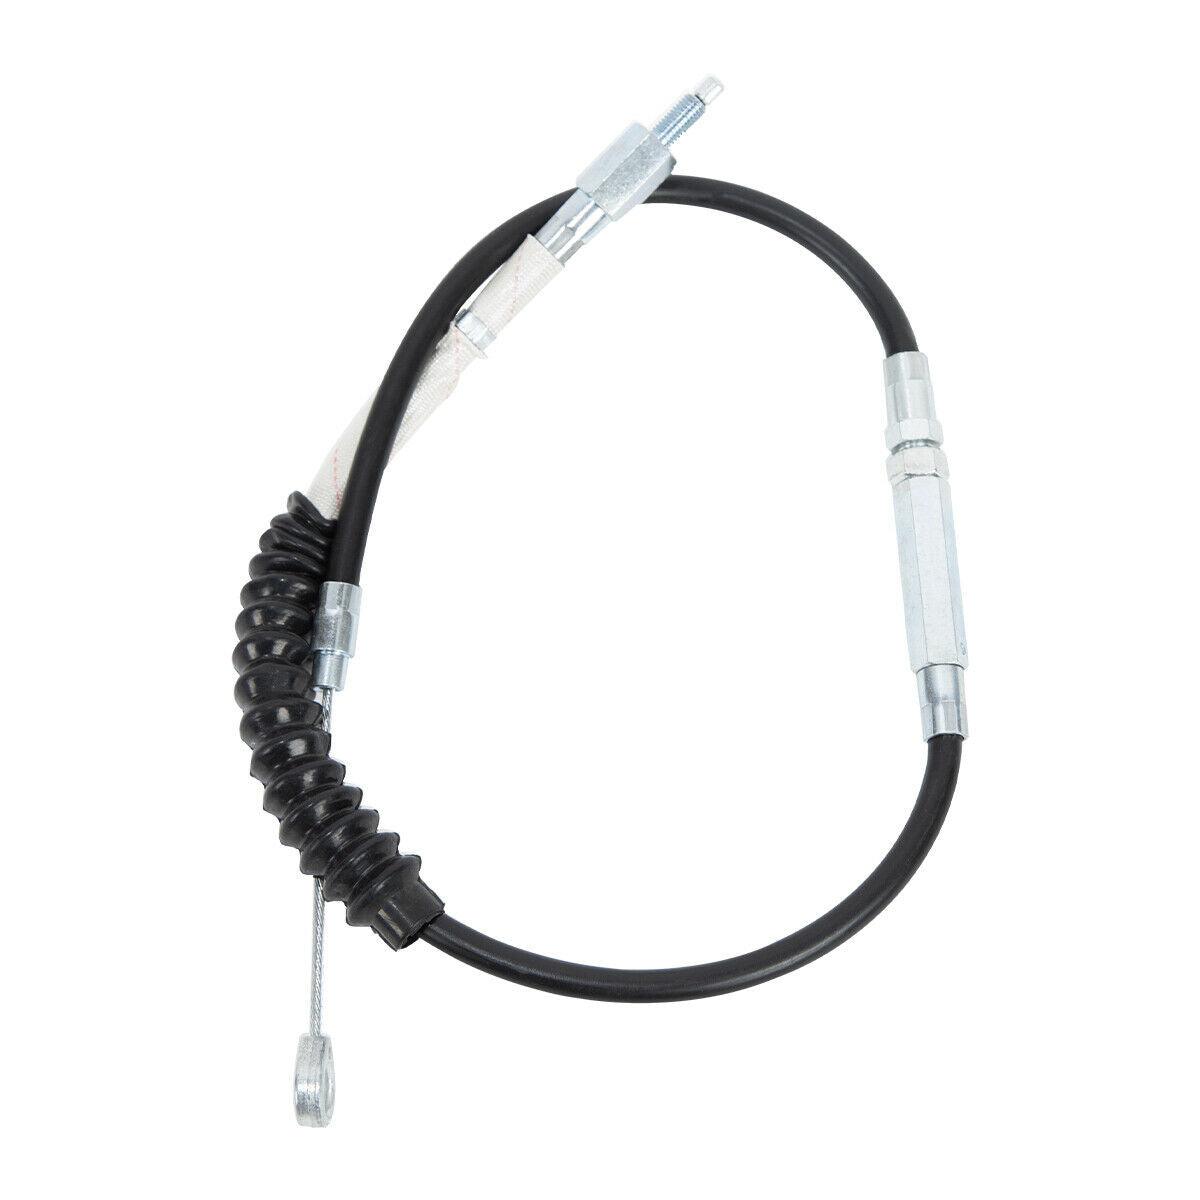 80cm Black Clutch Cable Fit For Harley Sportster 1200 Iron 883 Forty Eight - Moto Life Products